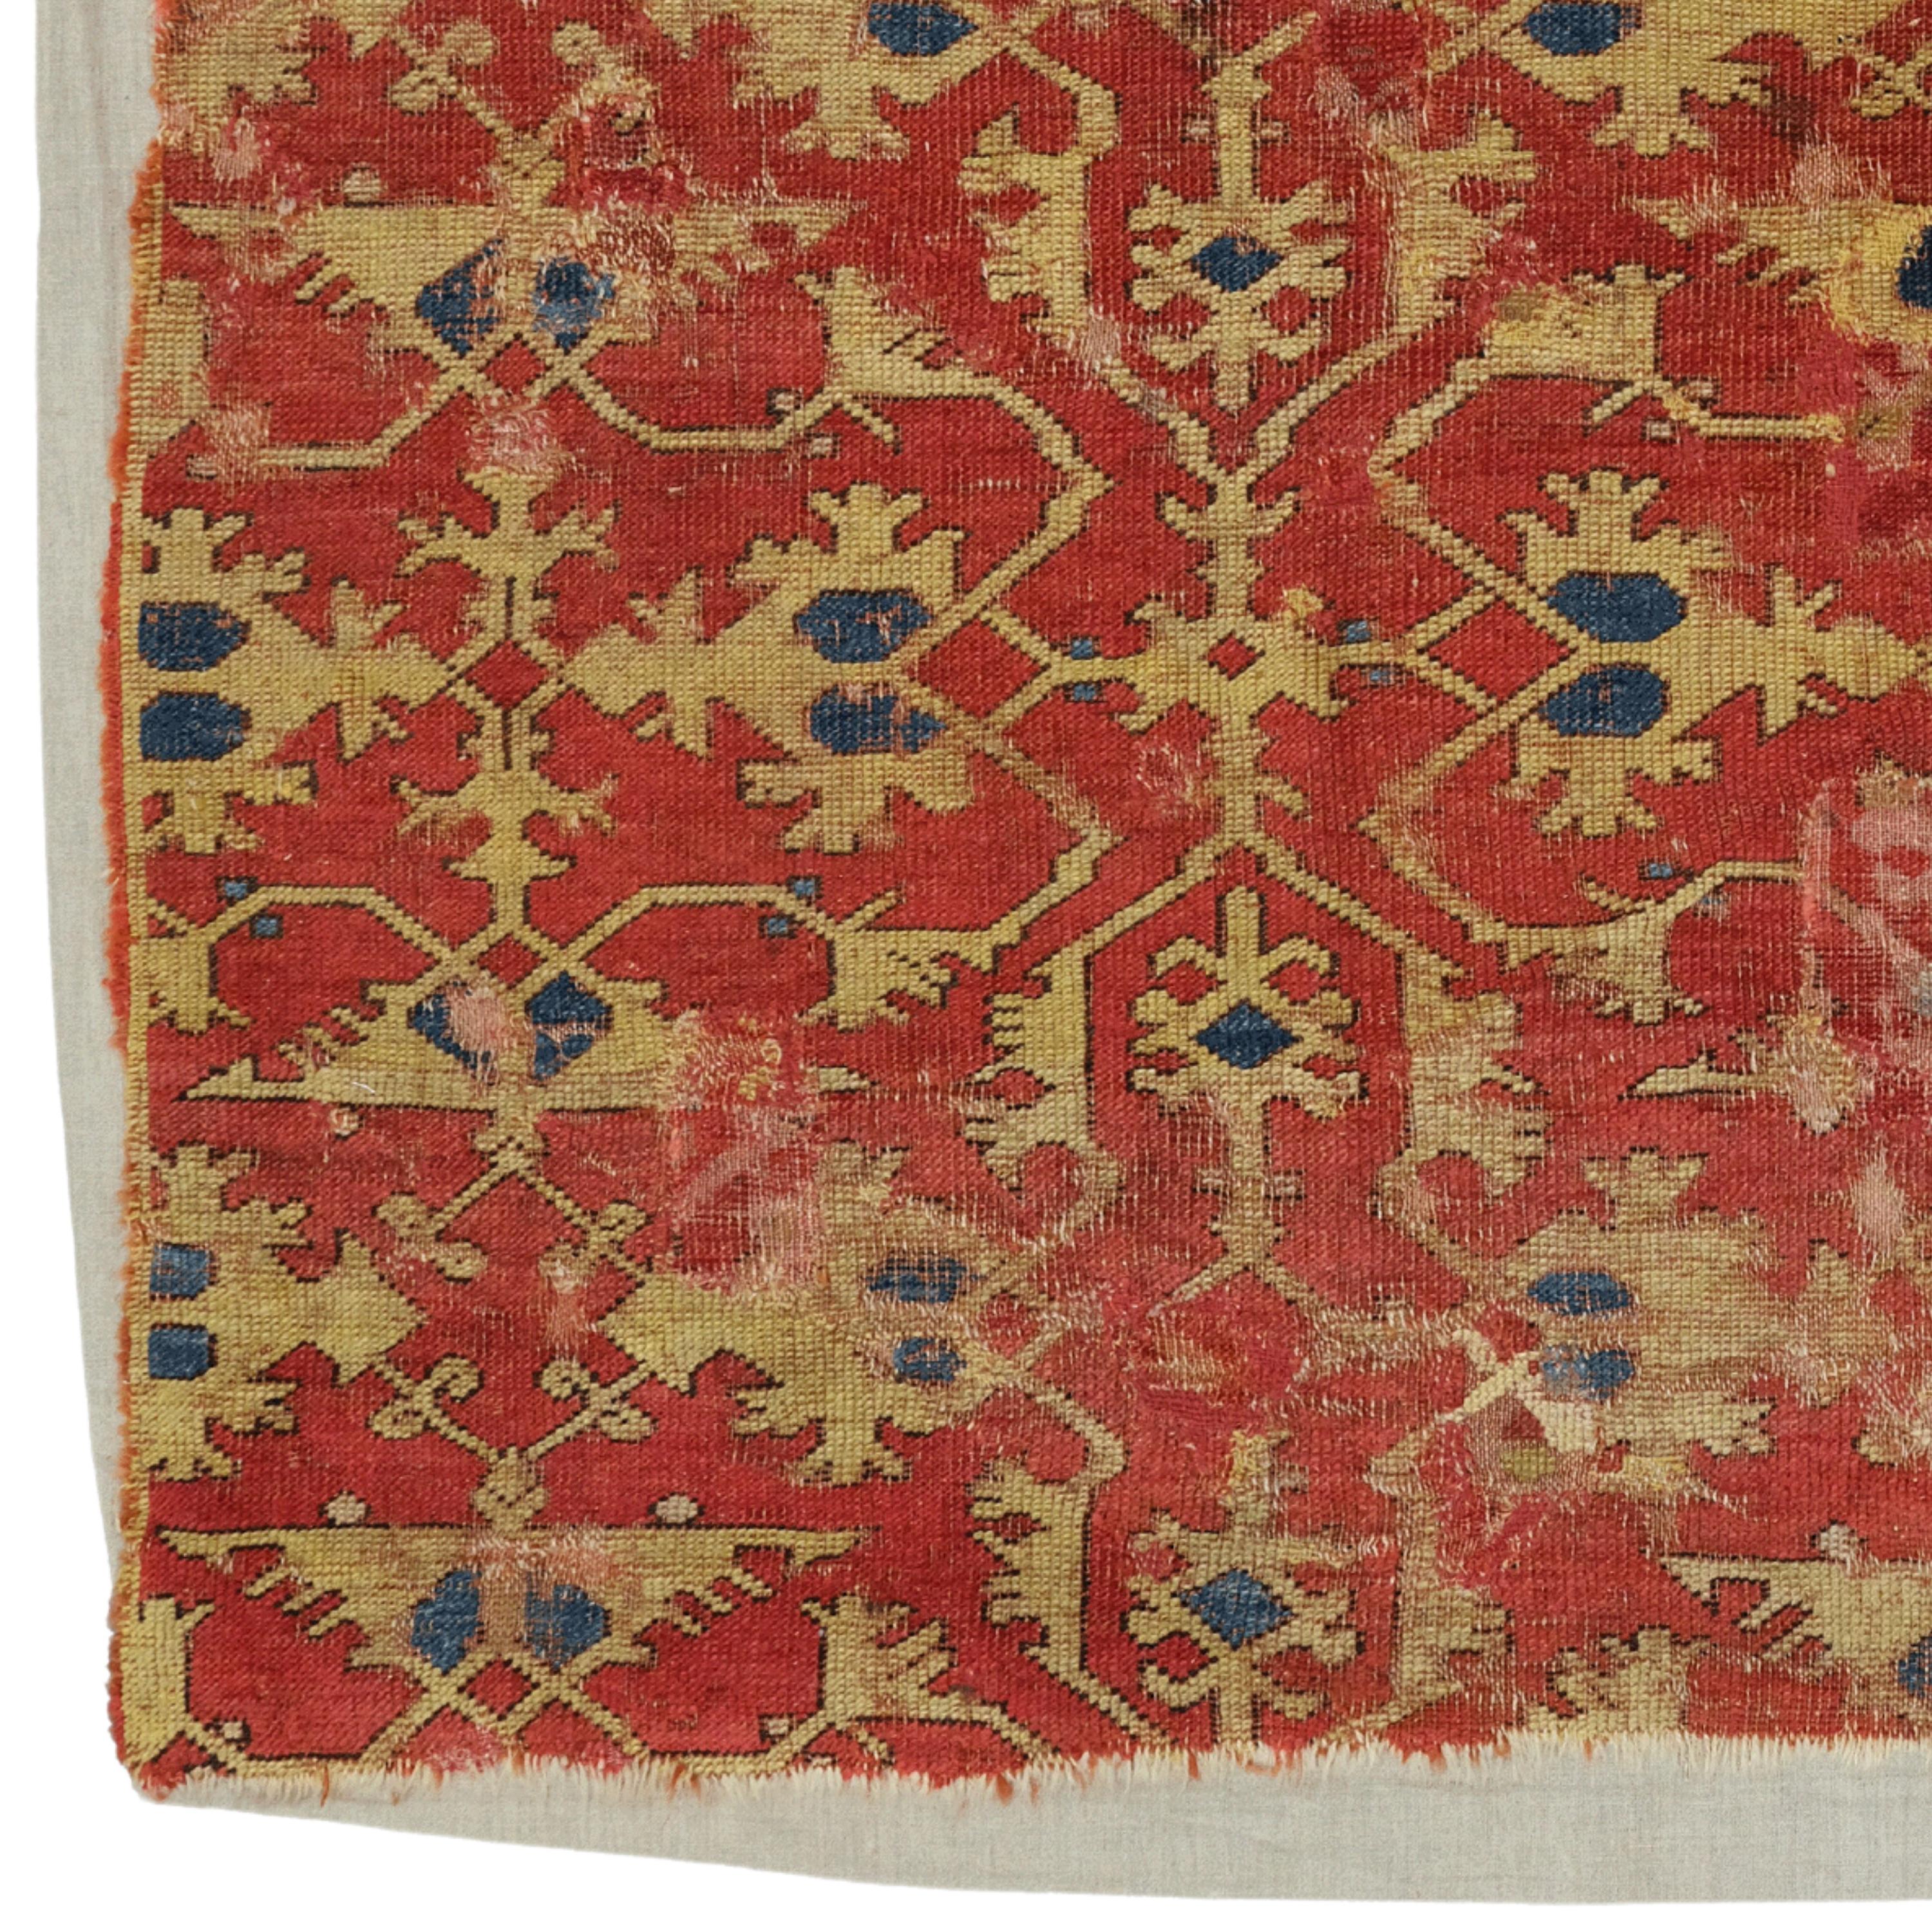 Early 17th Century Lotto Rug Fragment  Antique Fragment

“Lotto” is a term of convenience for the repeated pattern of arabesque forms used in many sixteenth- and seventeenth-century Turkish rugs. The term is taken from the name of the